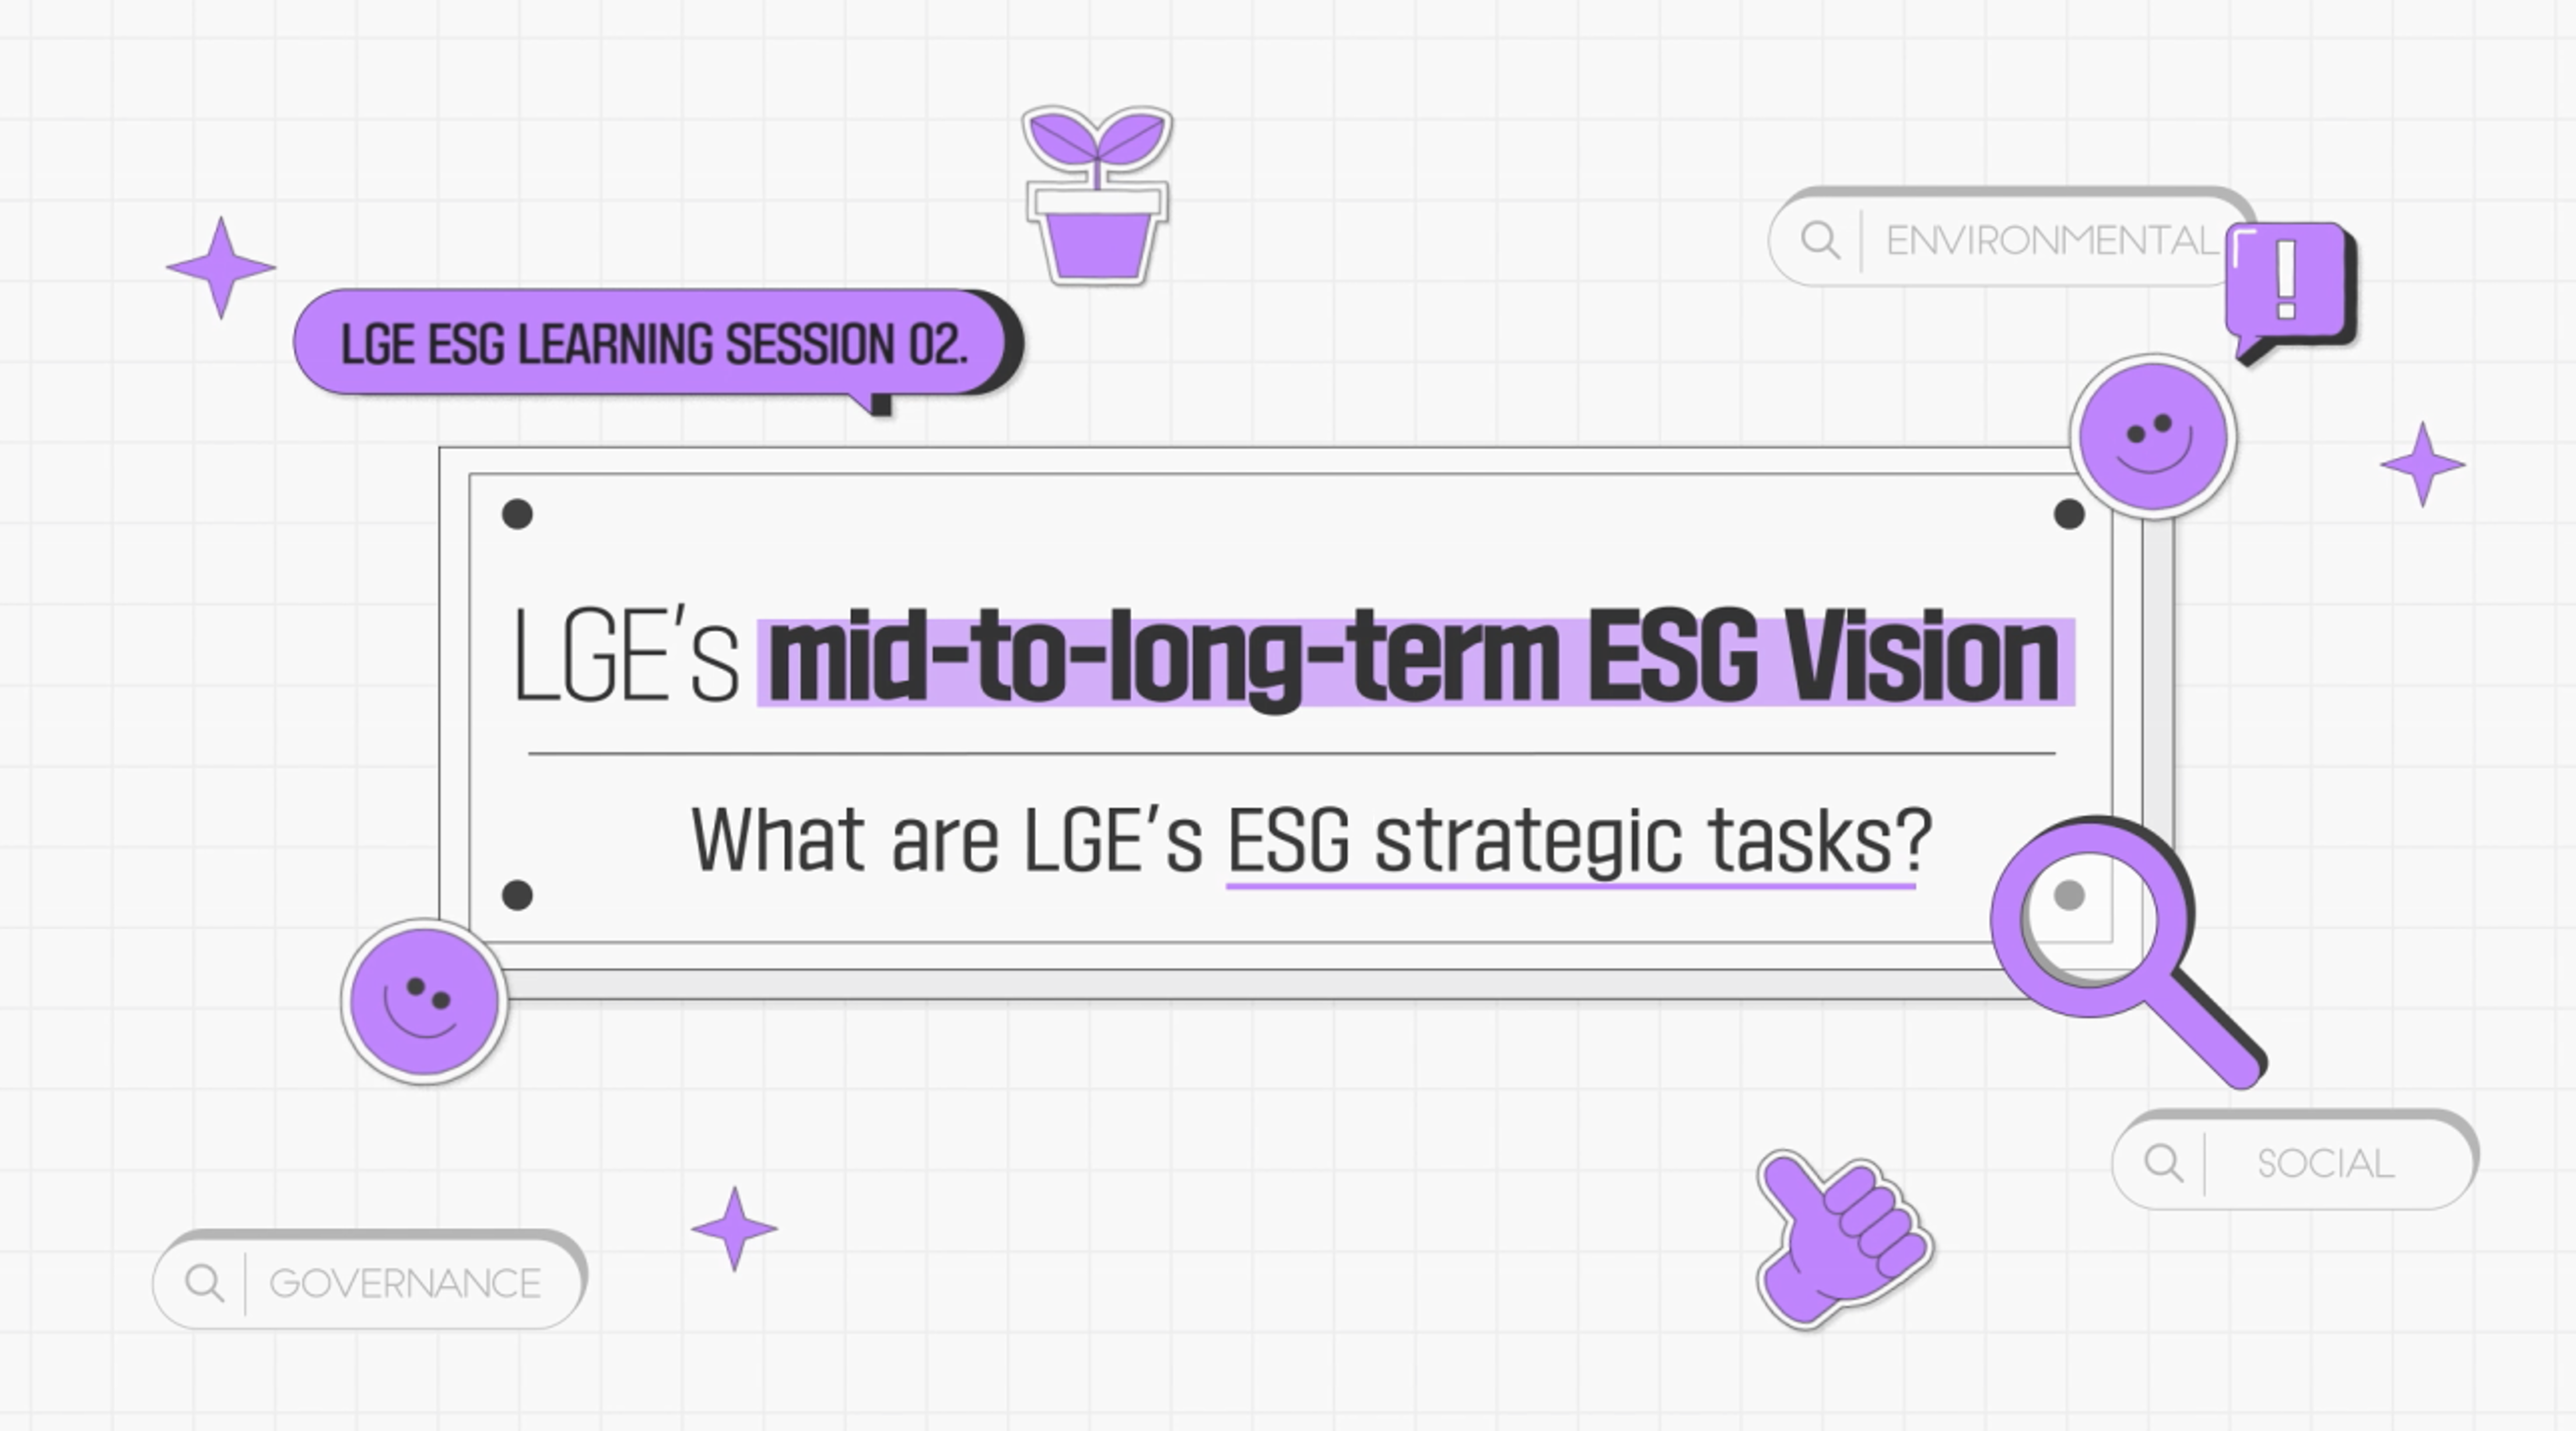 Image depicting the second lesson of LG's ESG training program for its employees with the phrases 